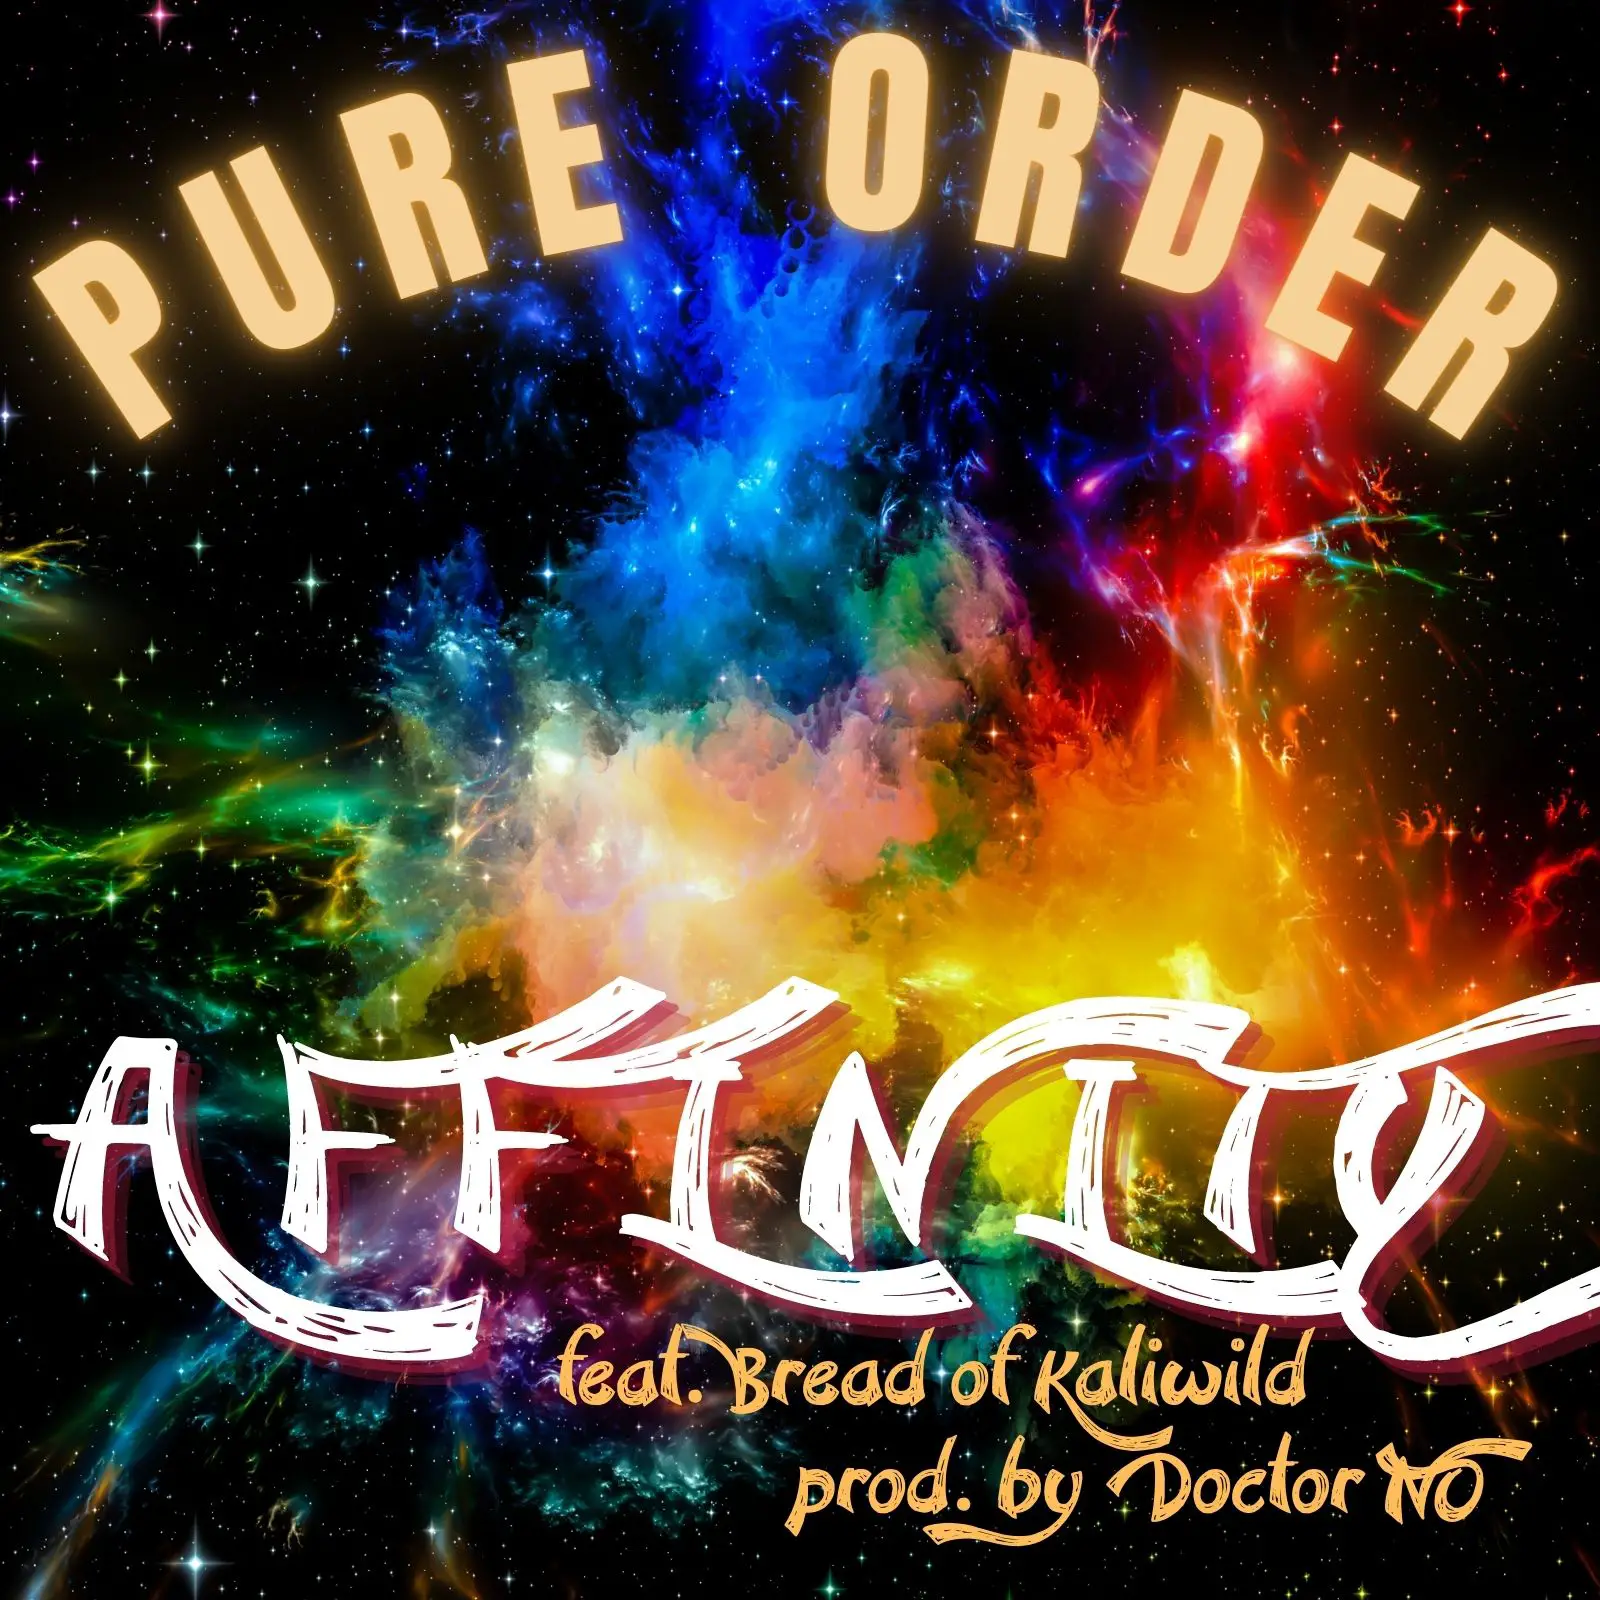 Pure Order - "Affinity" Review | Opinions | LIVING LIFE FEARLESS